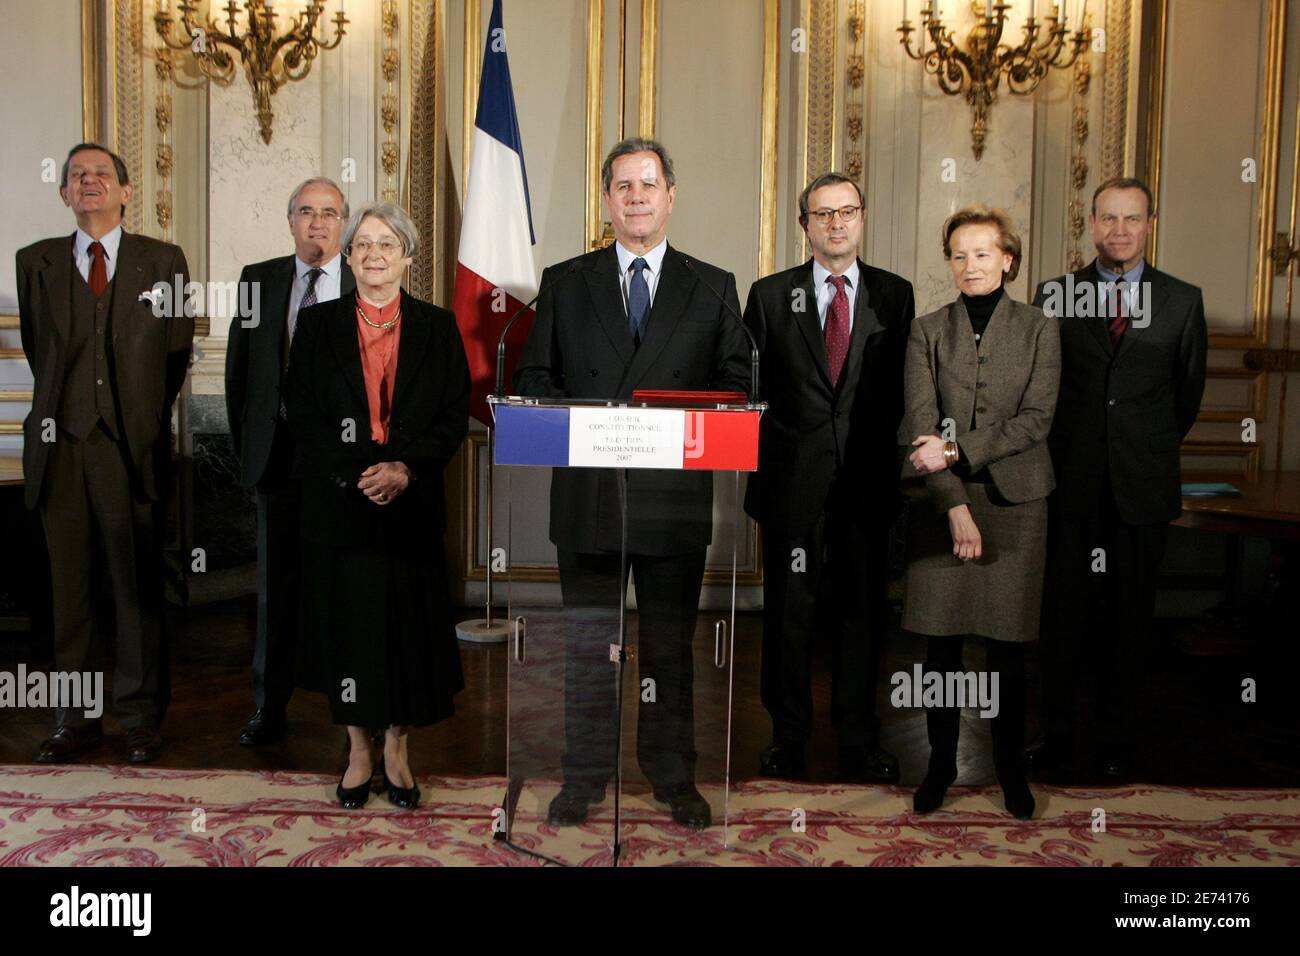 President of French Constitutional Council, Jean-Louis Debre announces the official list of the 12 candidates to the upcoming French Presidential election, in Paris, France, on March 19, 2007. He's flanked by Constitutional Council member : Guy Canivet, Renaud Denoix de Saint-Marc, Jean-Louis Pezant, Dominique Schnapper, Olivier Dutheillet de Lamothe, Jacqueline de Guillenchmidt and Pierre Steinmetz. Photo by Thibault Camus/ABACAPRESS.COM Stock Photo